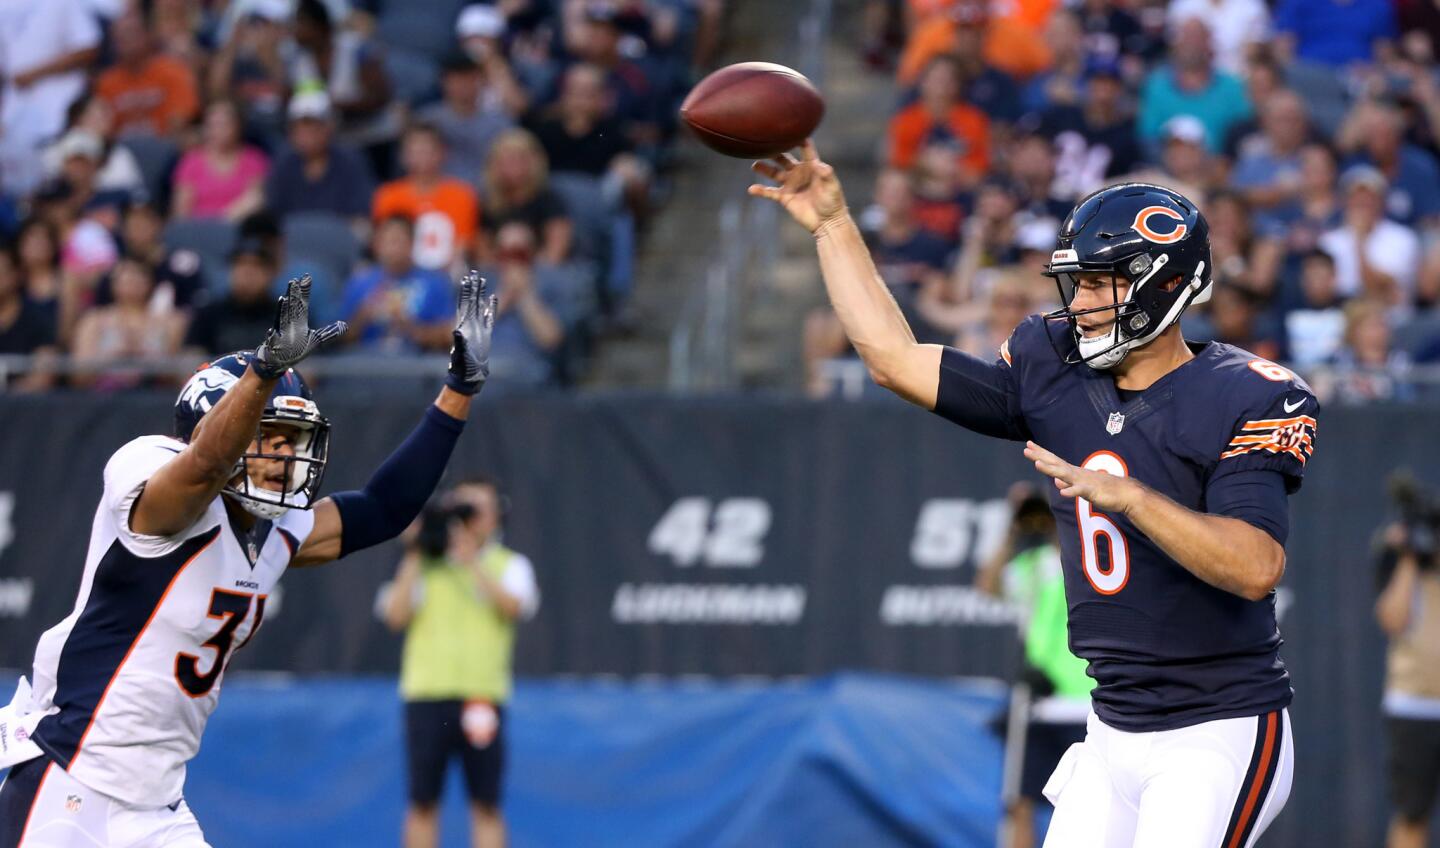 Bears quarterback Jay Cutler throws a pass in the first quarter of a preseason game against the Broncos at Soldier Field on August 11, 2016.